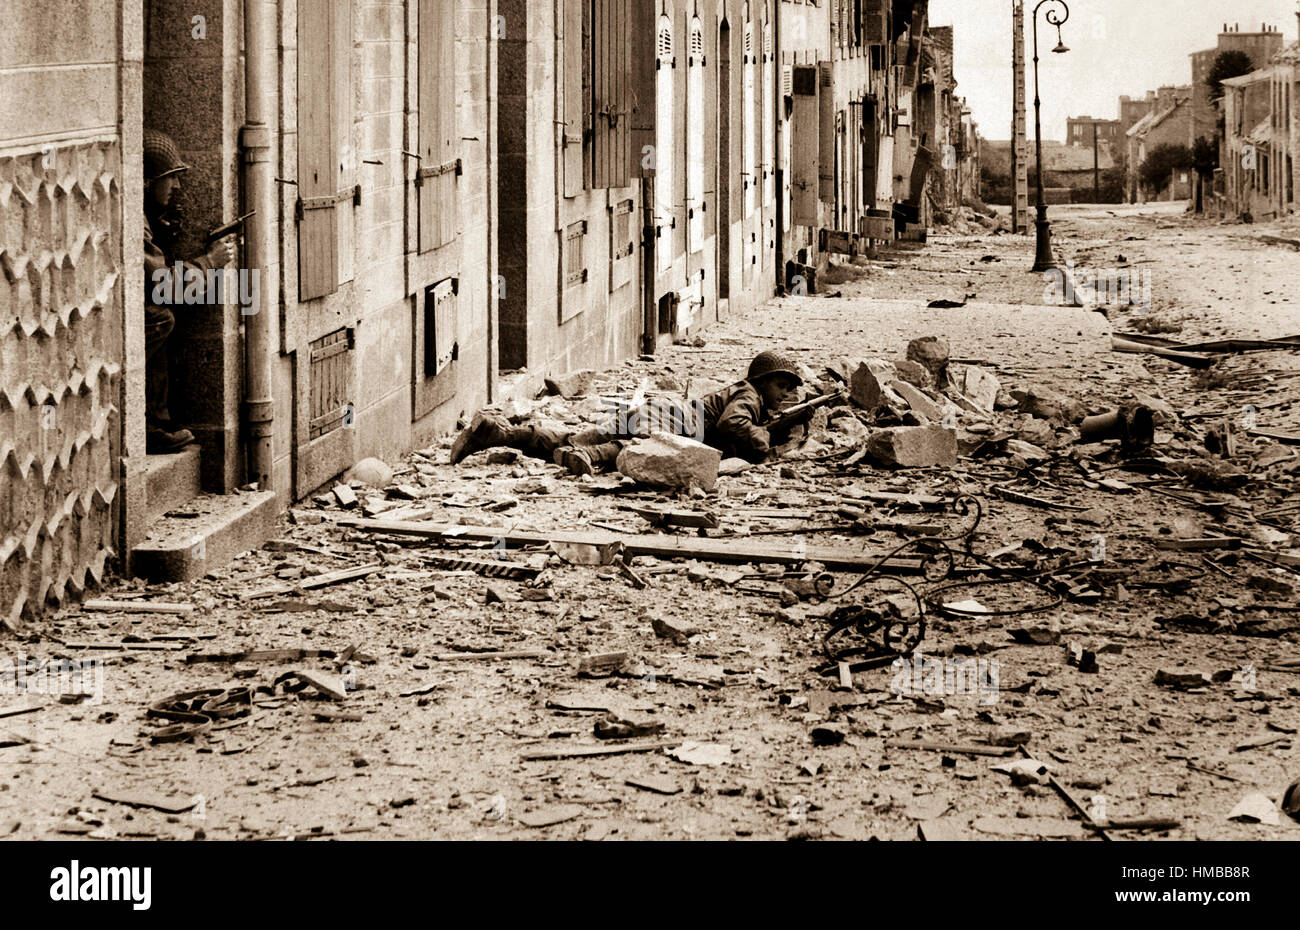 Americans take shelter during mop-up of Brest.  Crouching behind a pile of rubble, a U.S. soldier watches for German snipers in the streets of Brest, while a companion covers him from behind a doorway.  September 1944.  INP.  (OWI) Exact Date Shot Unknown NARA FILE #:  208-AA-19Z-1 WAR & CONFLICT BOOK #:  1054 Stock Photo